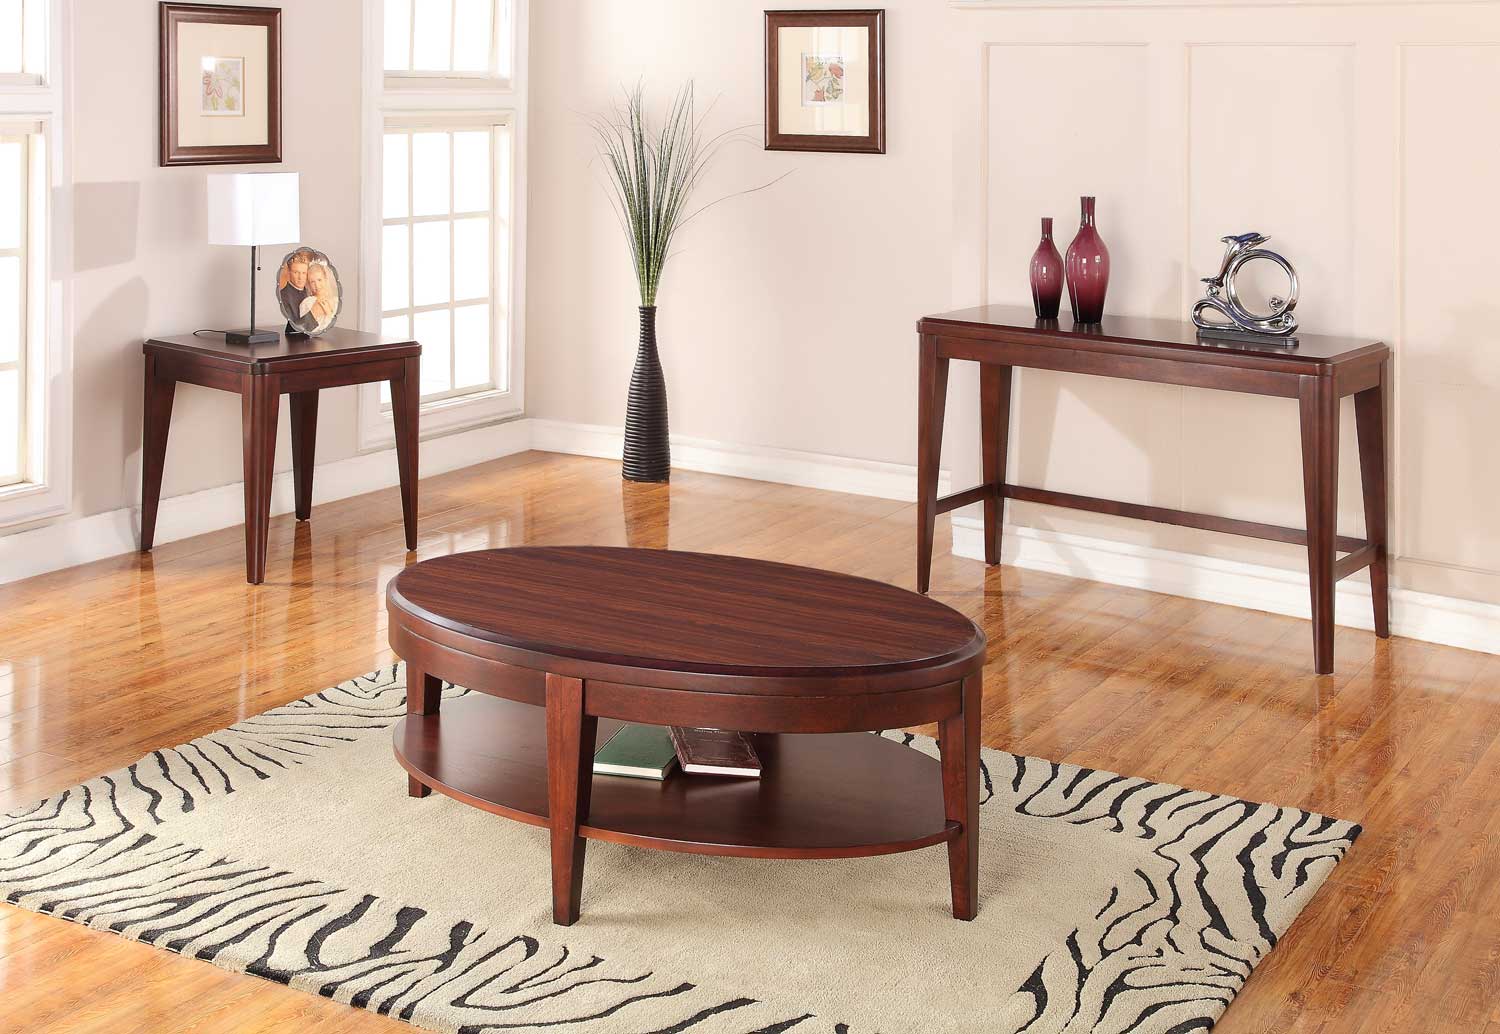 Homelegance Beaumont Occasional Table Set - Brown Cherry